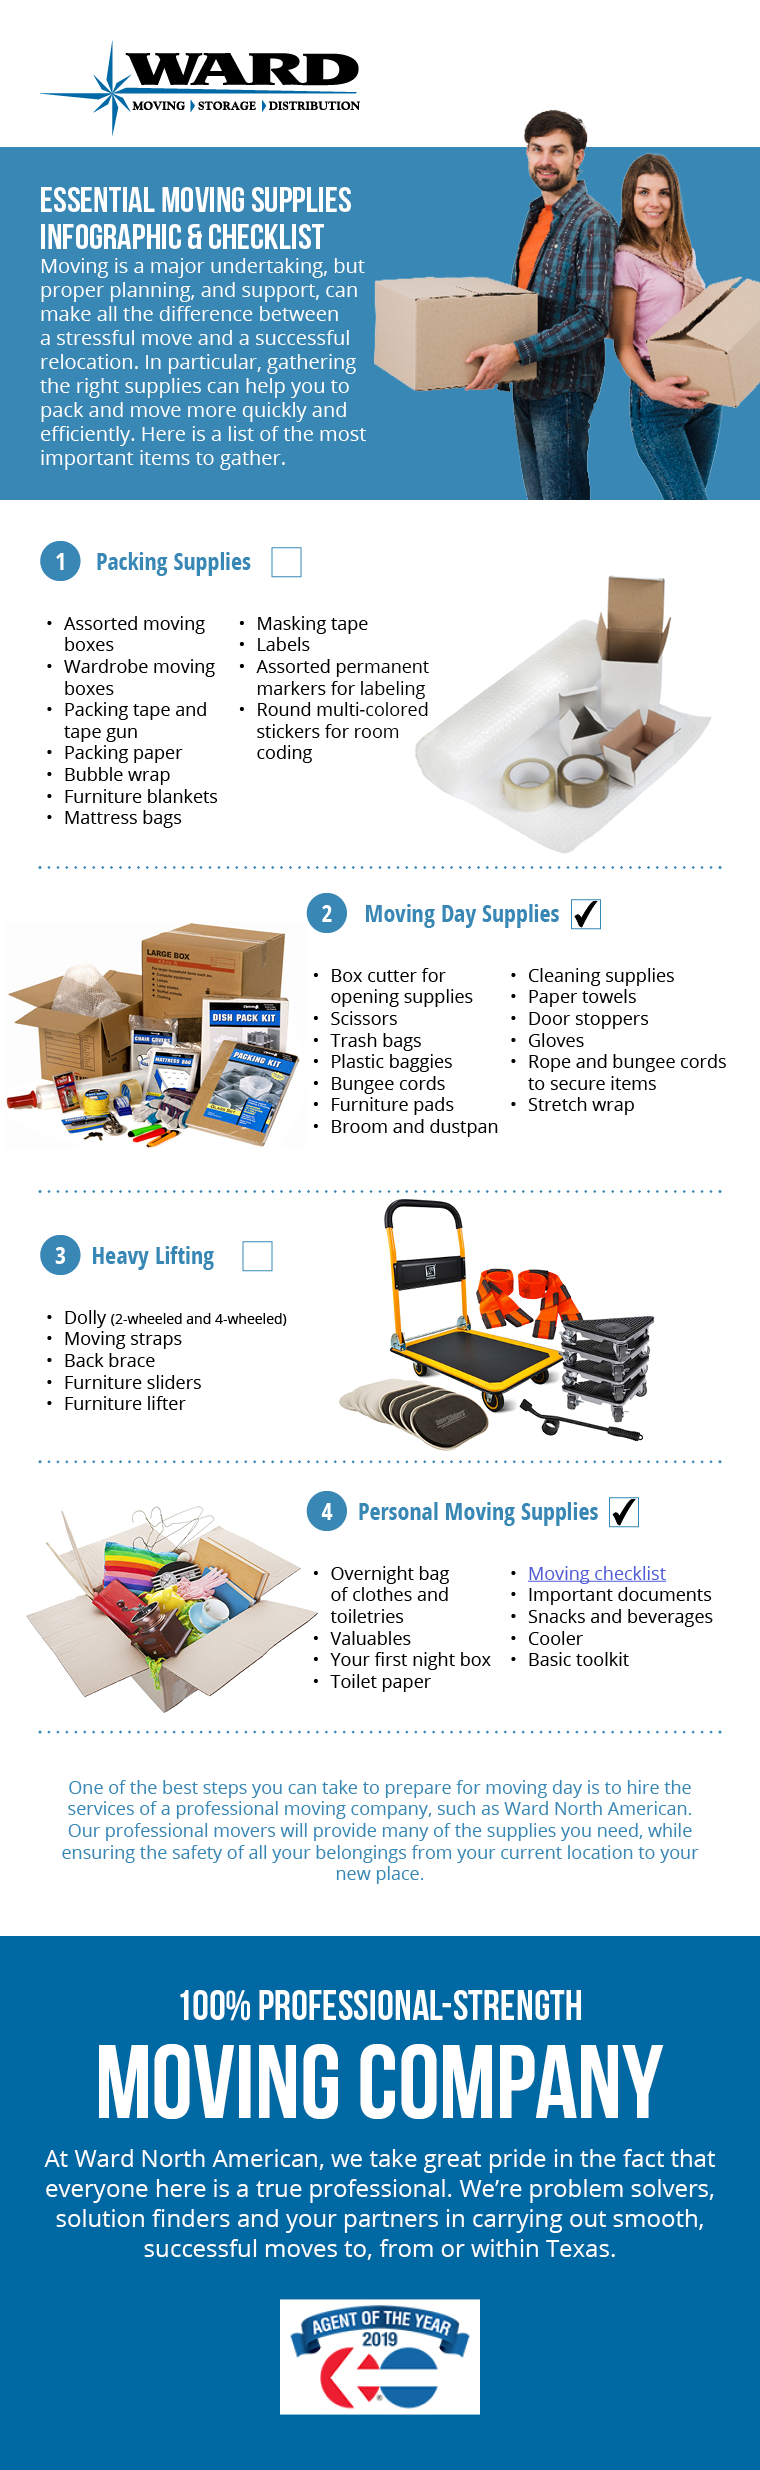 Moving Checklist: Pack Your Essentials Box